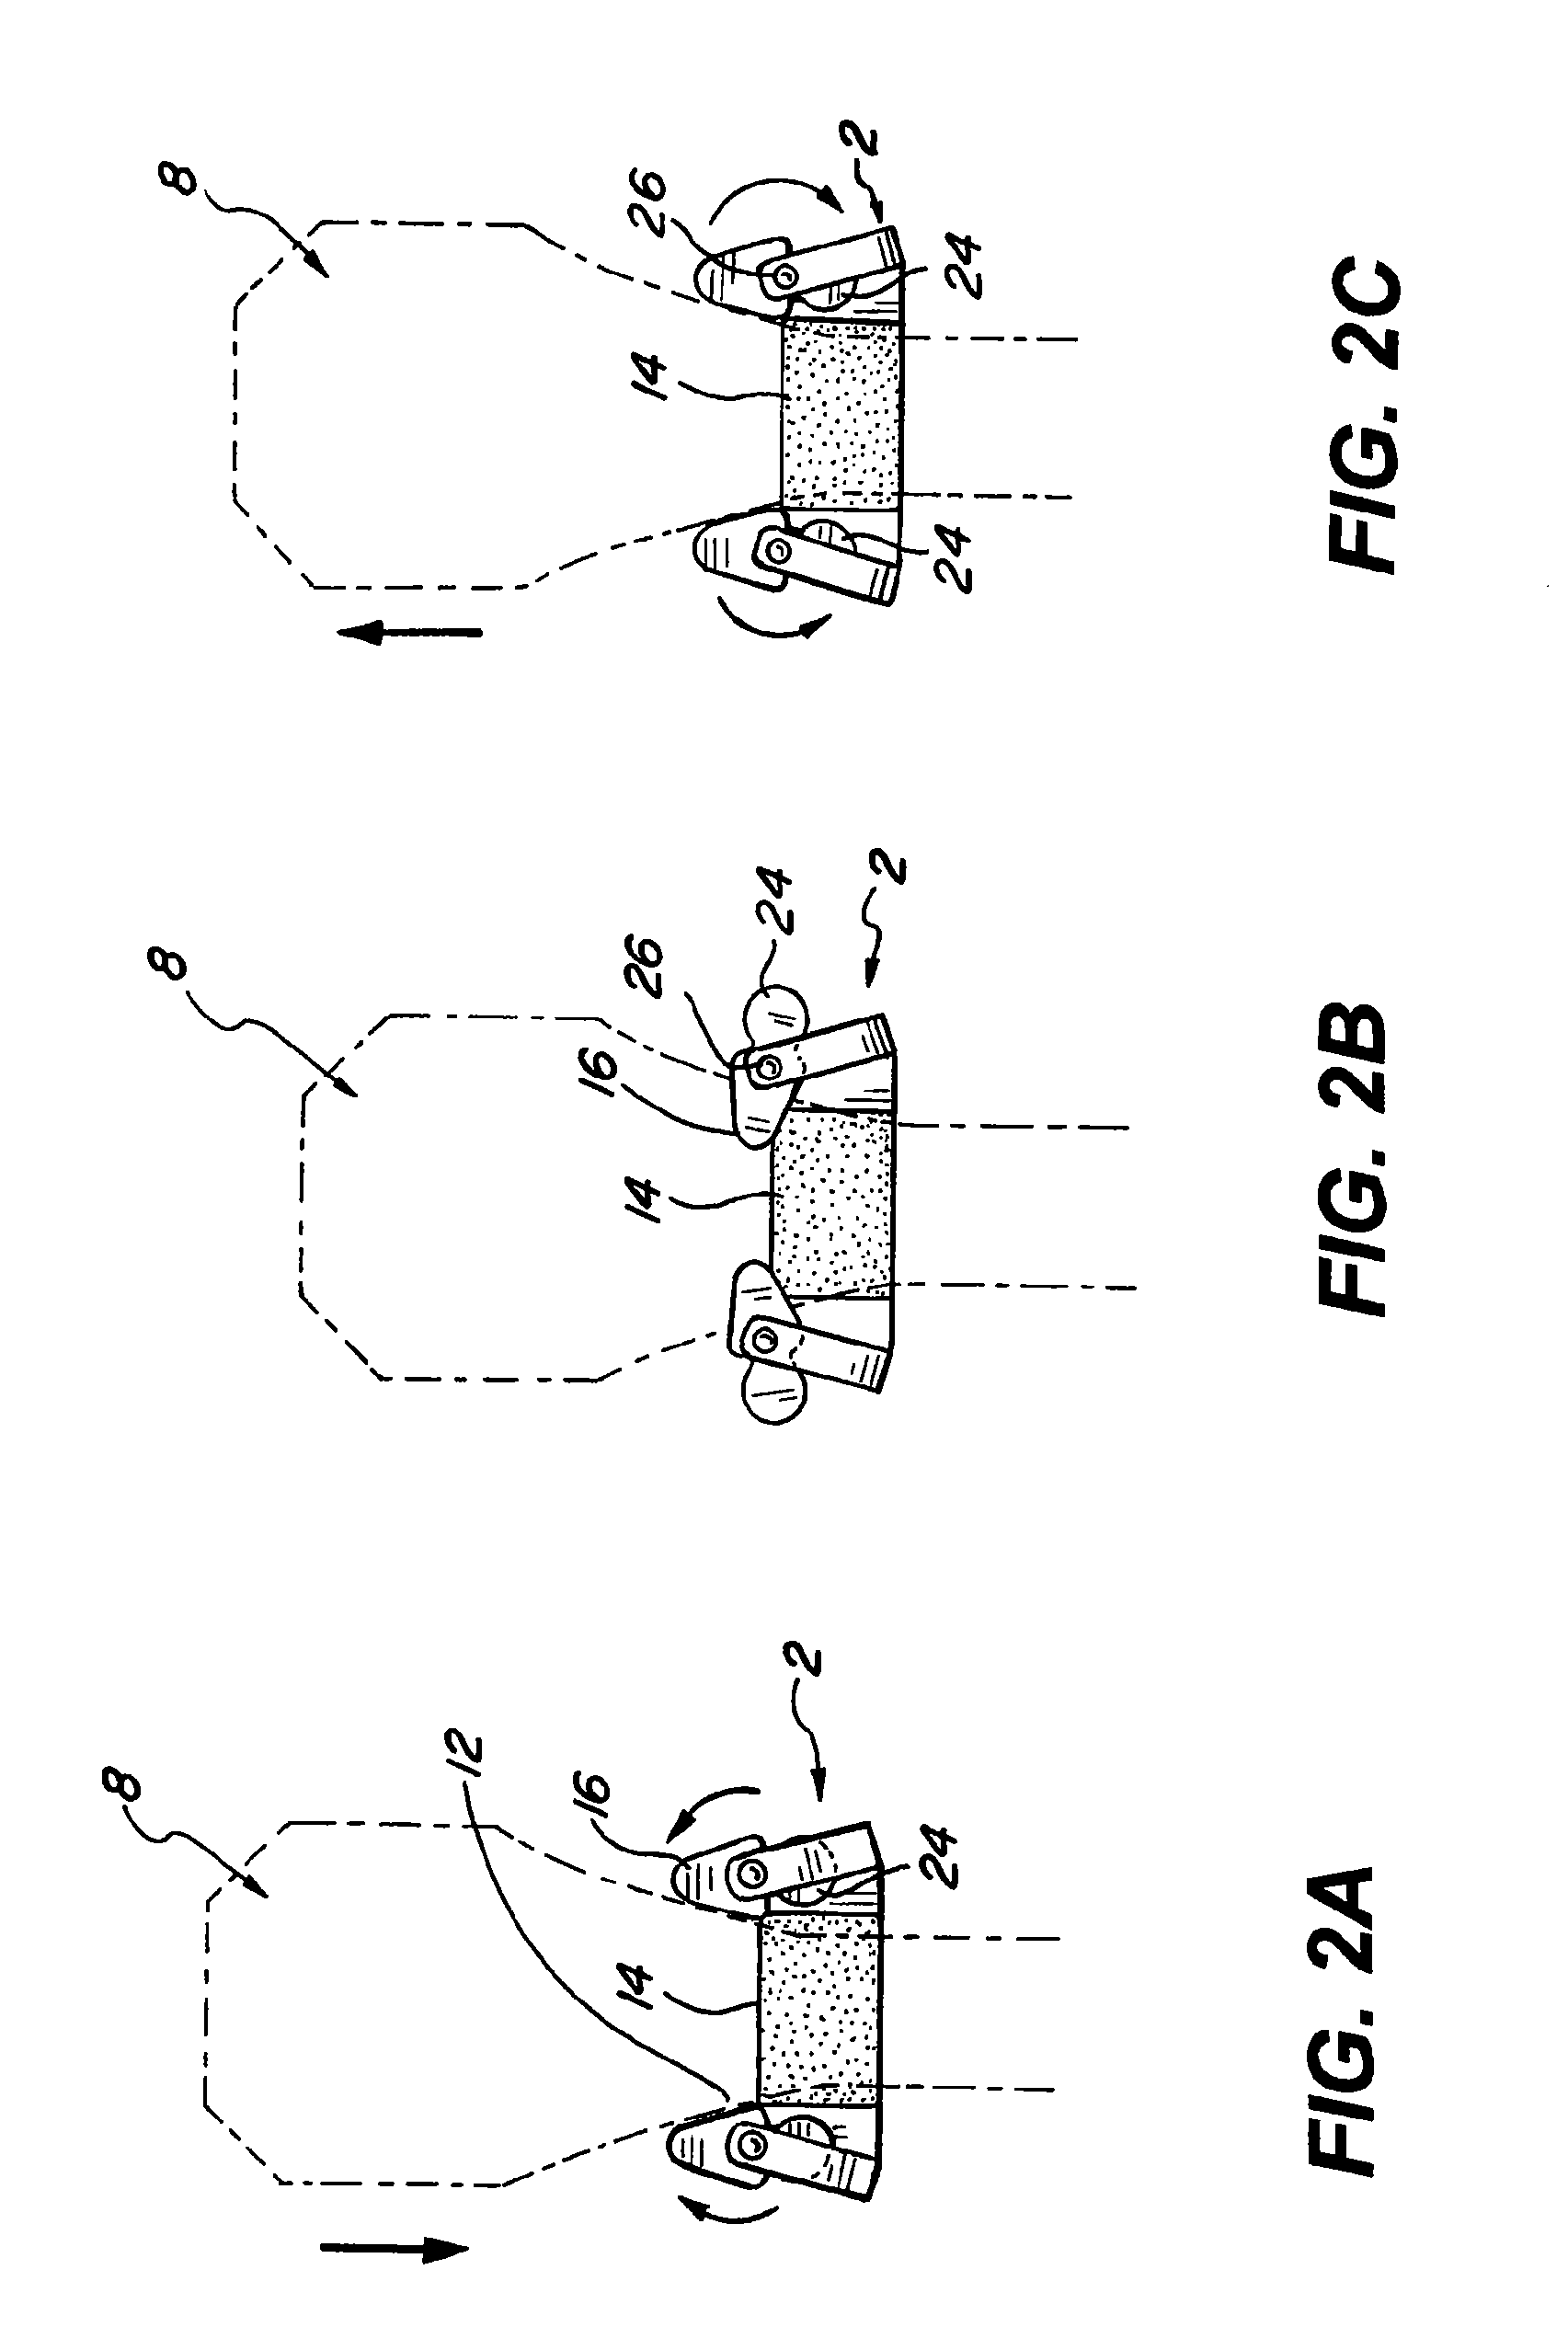 Locking device for retaining a musical instrument